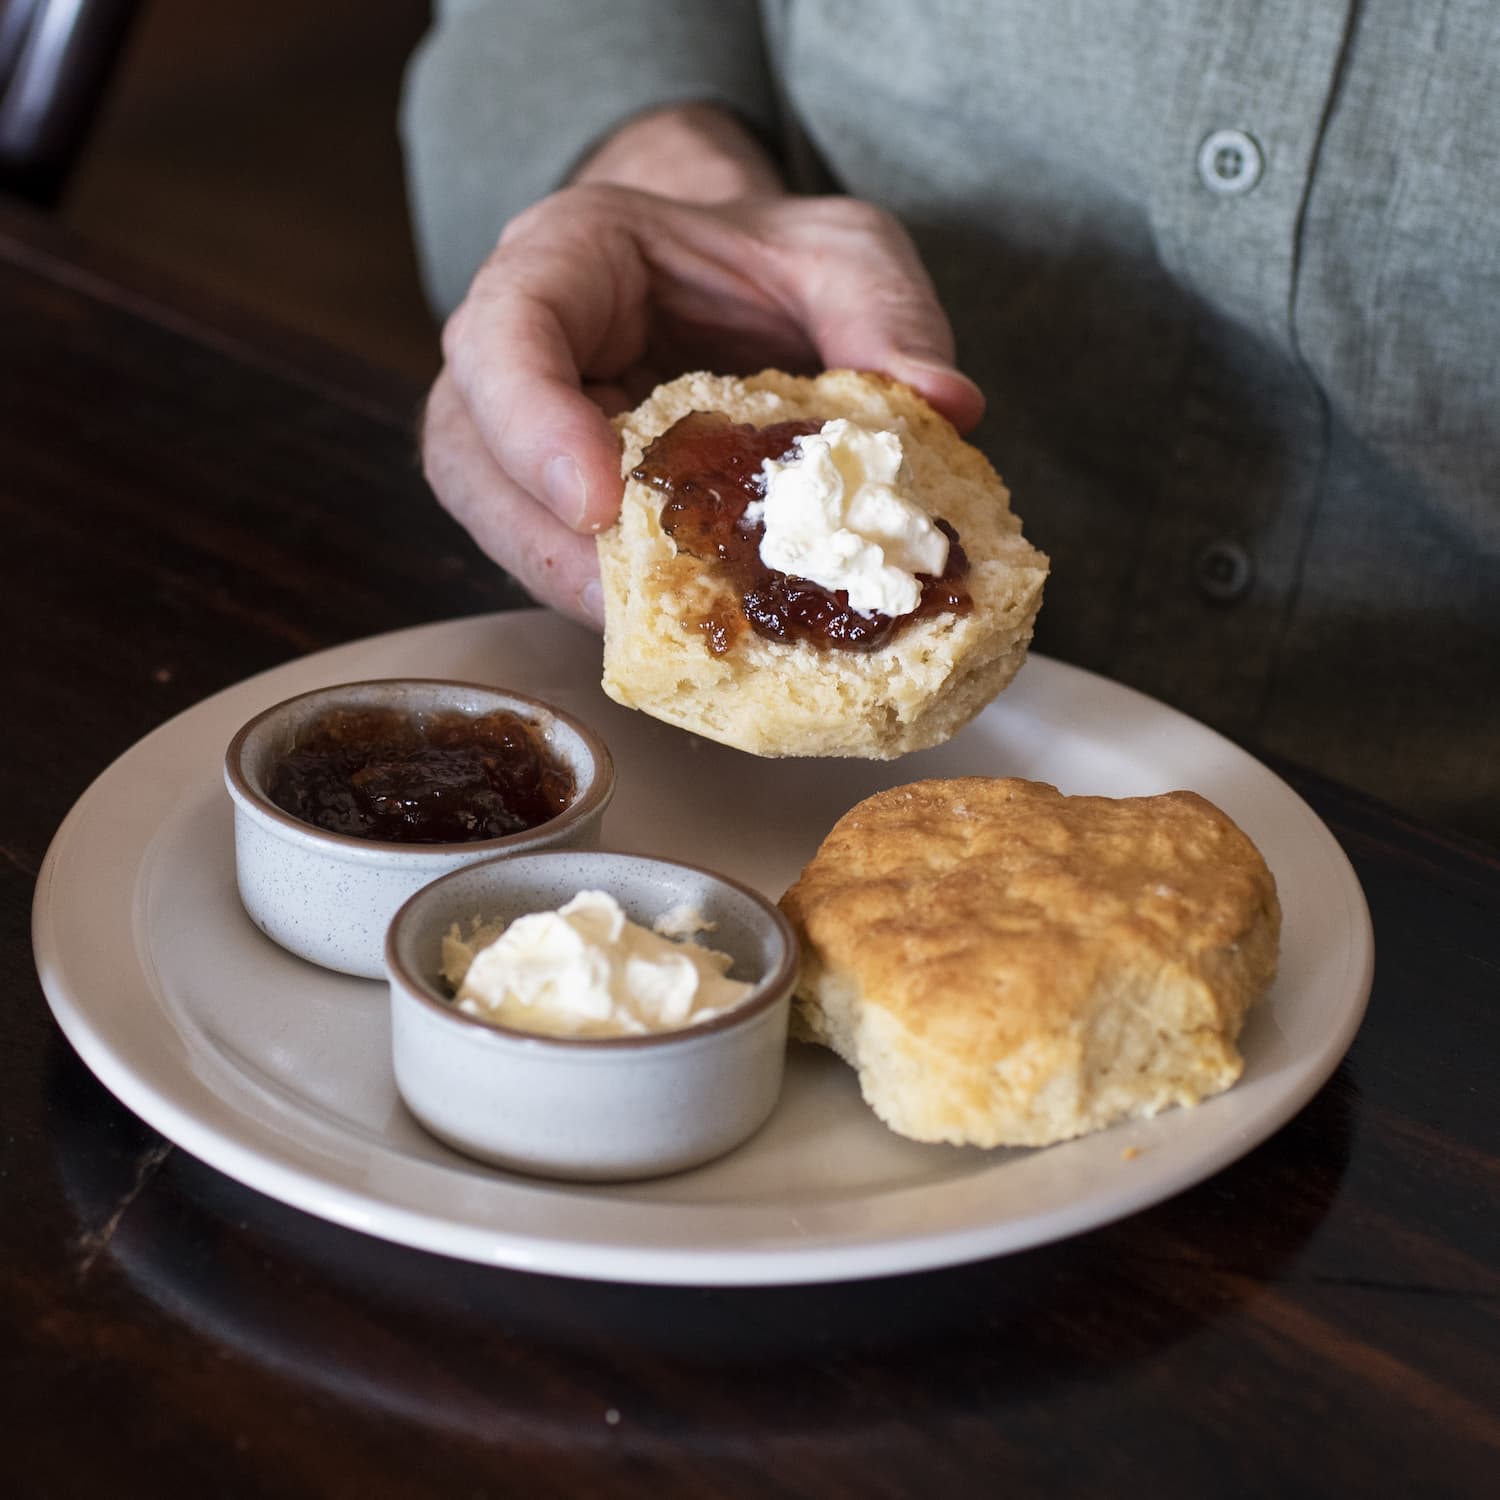 Man holding a scone with jam and cream